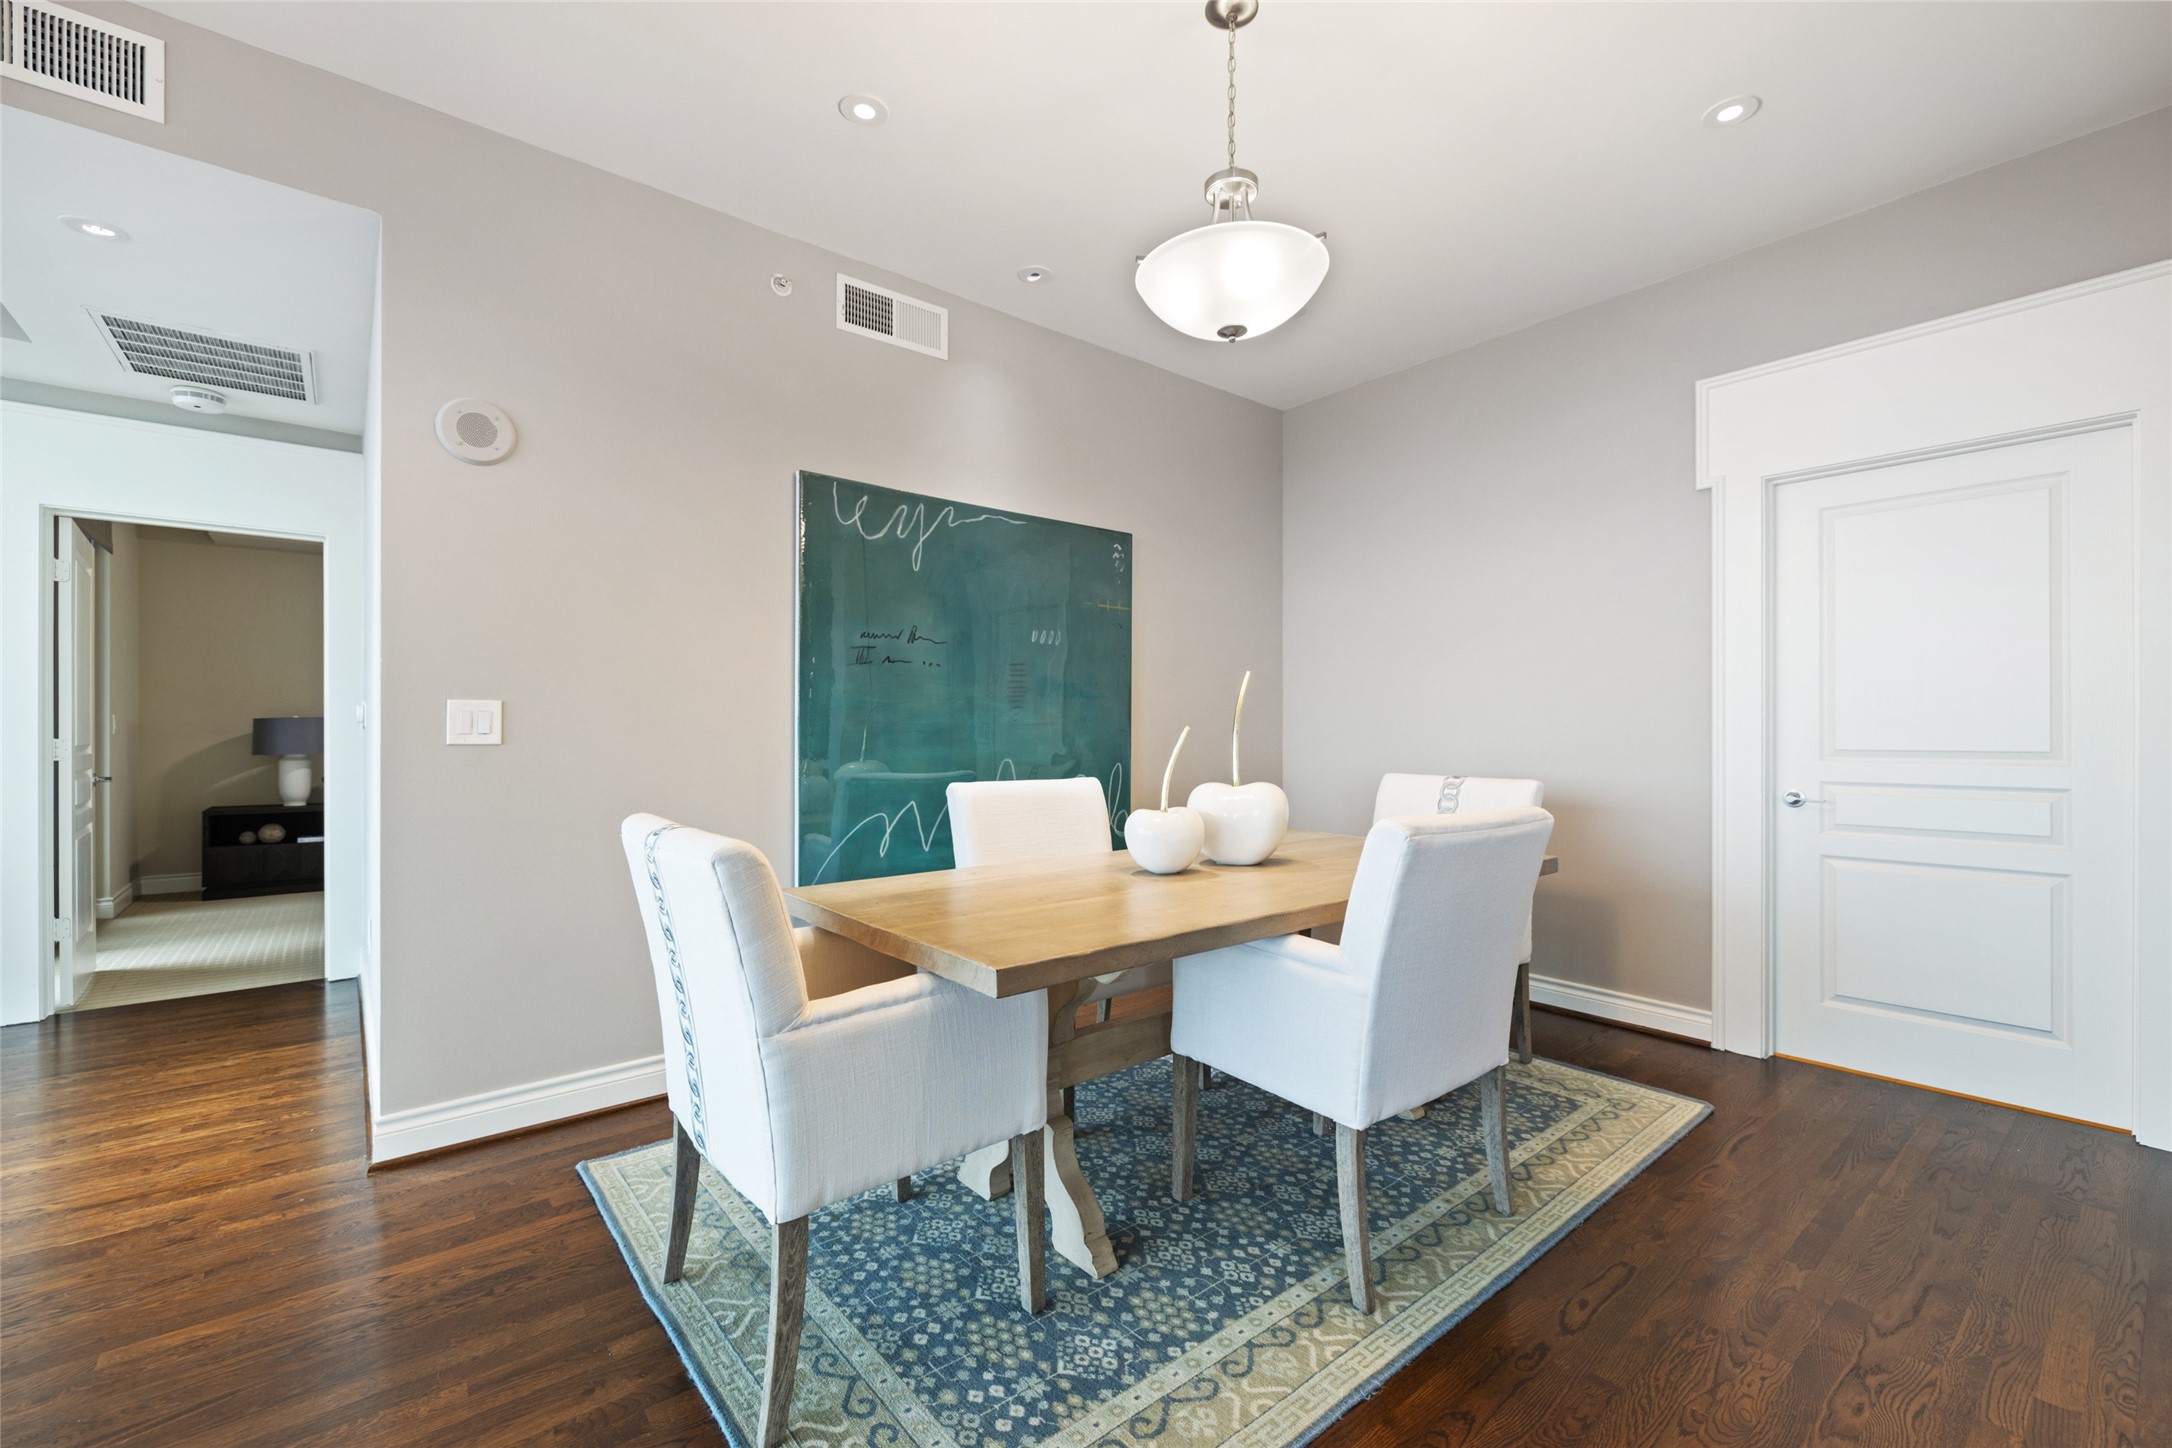 The Dining Room can handle large and small entertaining options.